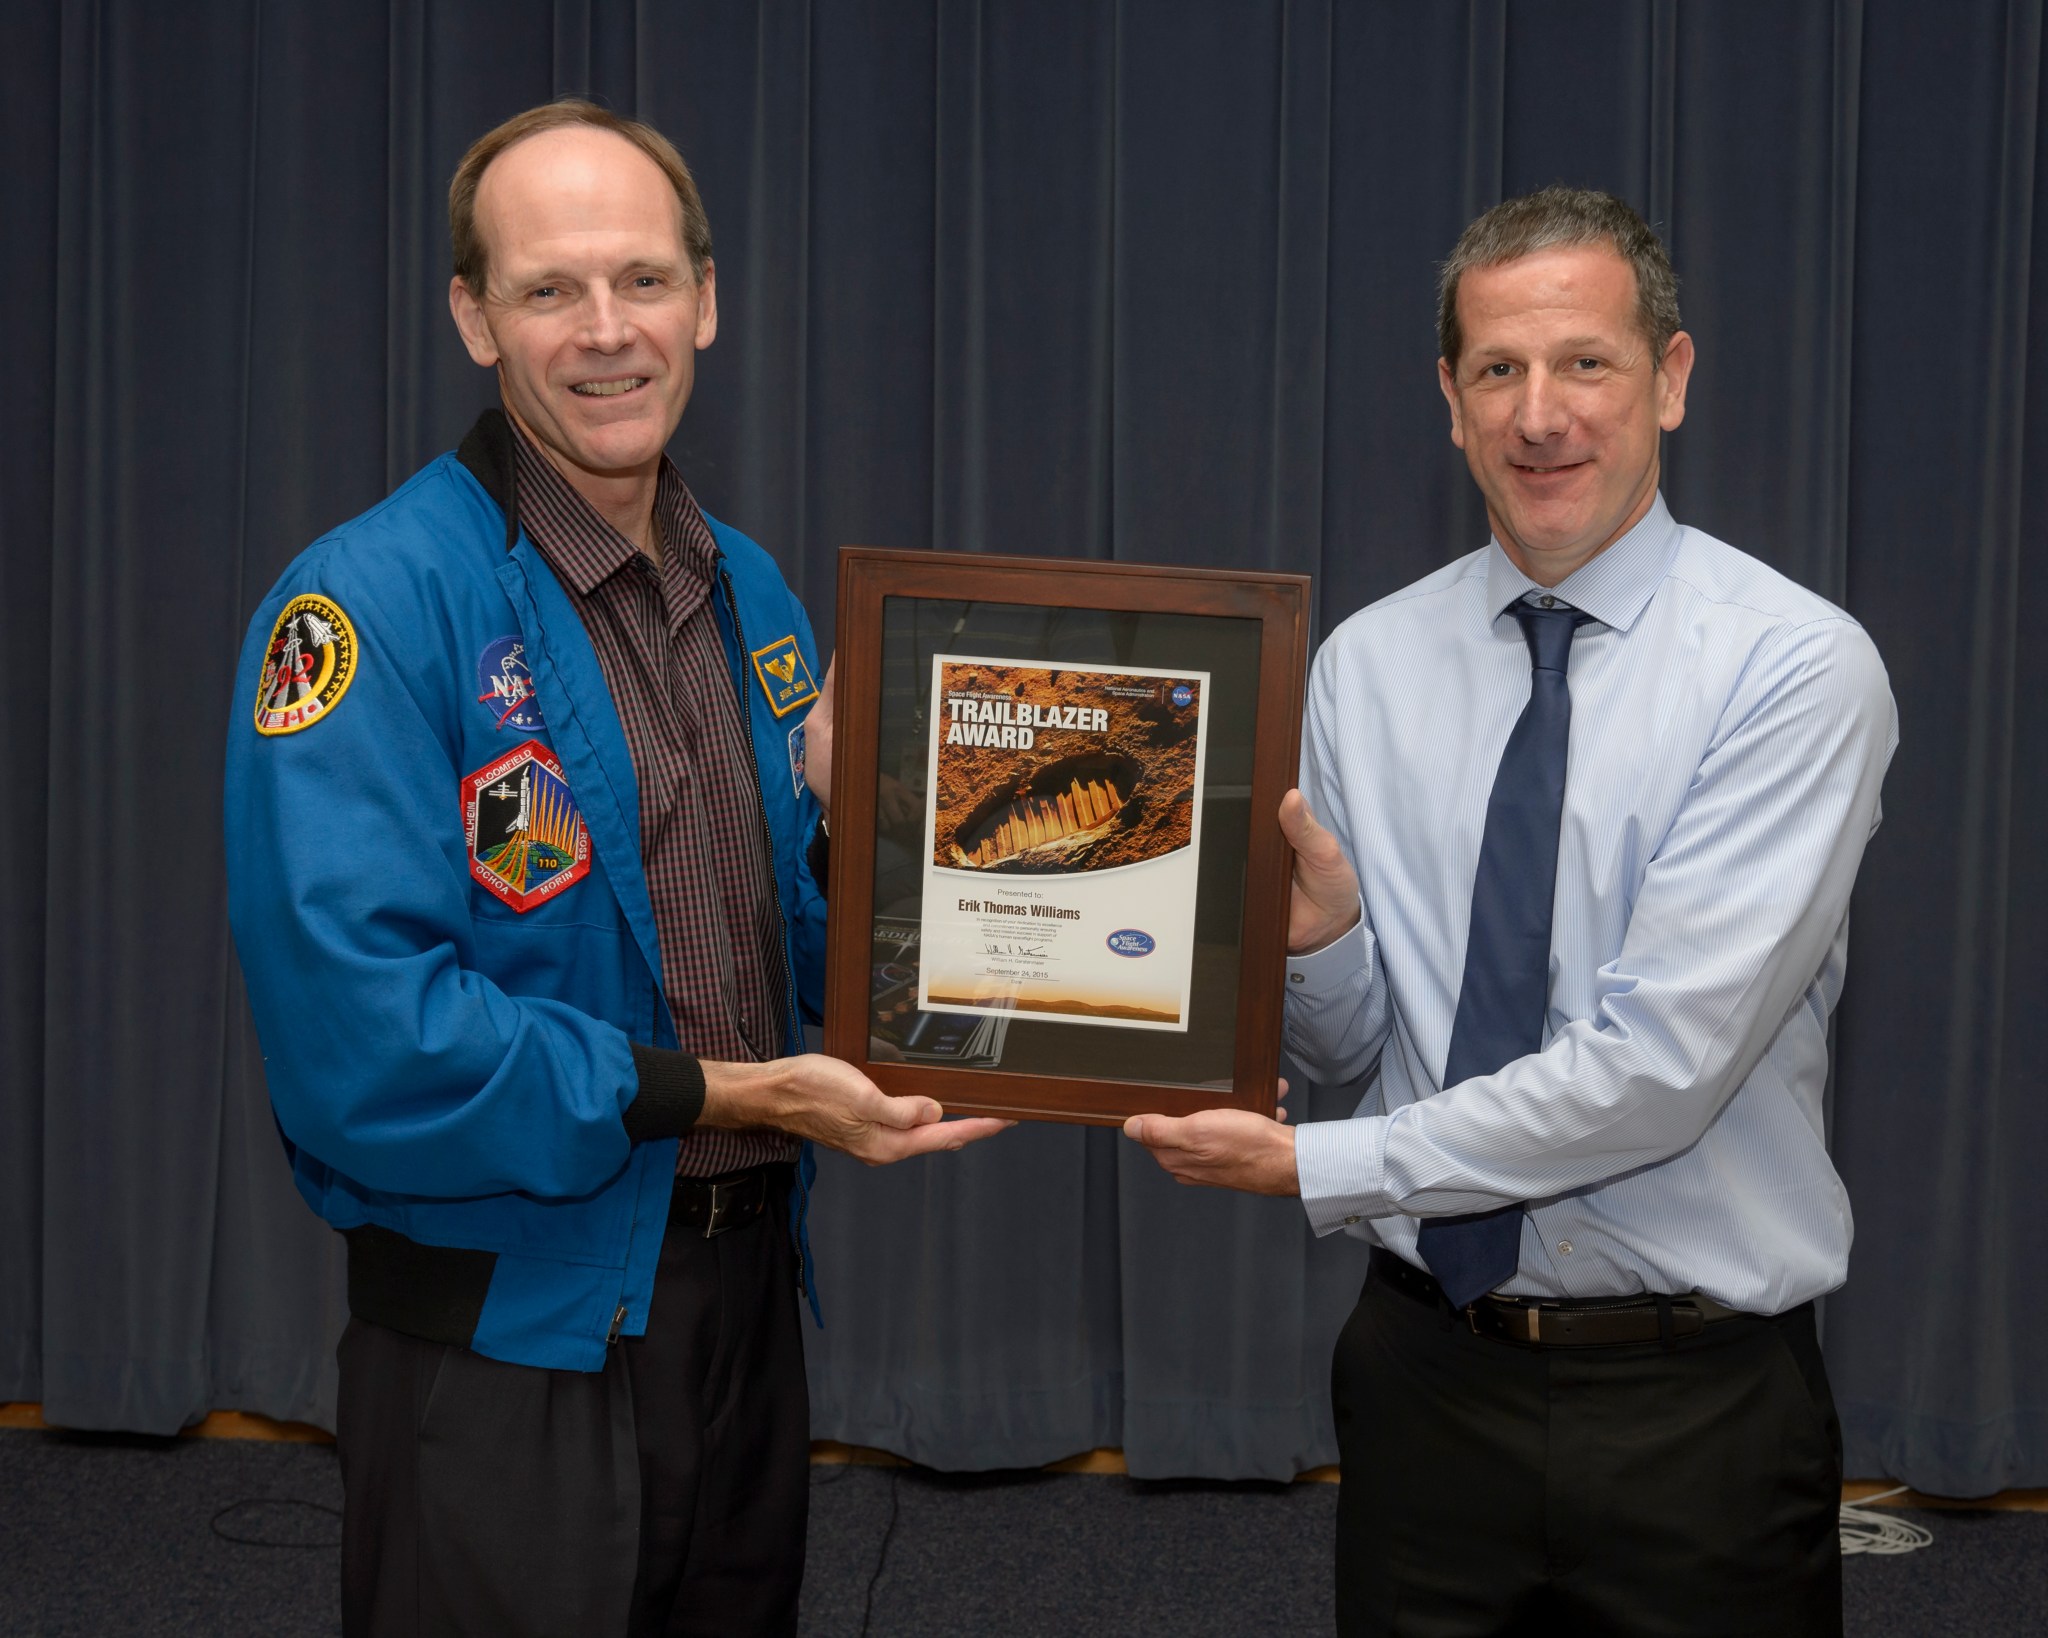 Erik Williams is presented with the Space Flight Awareness Trailblazer Award by Steve Smith